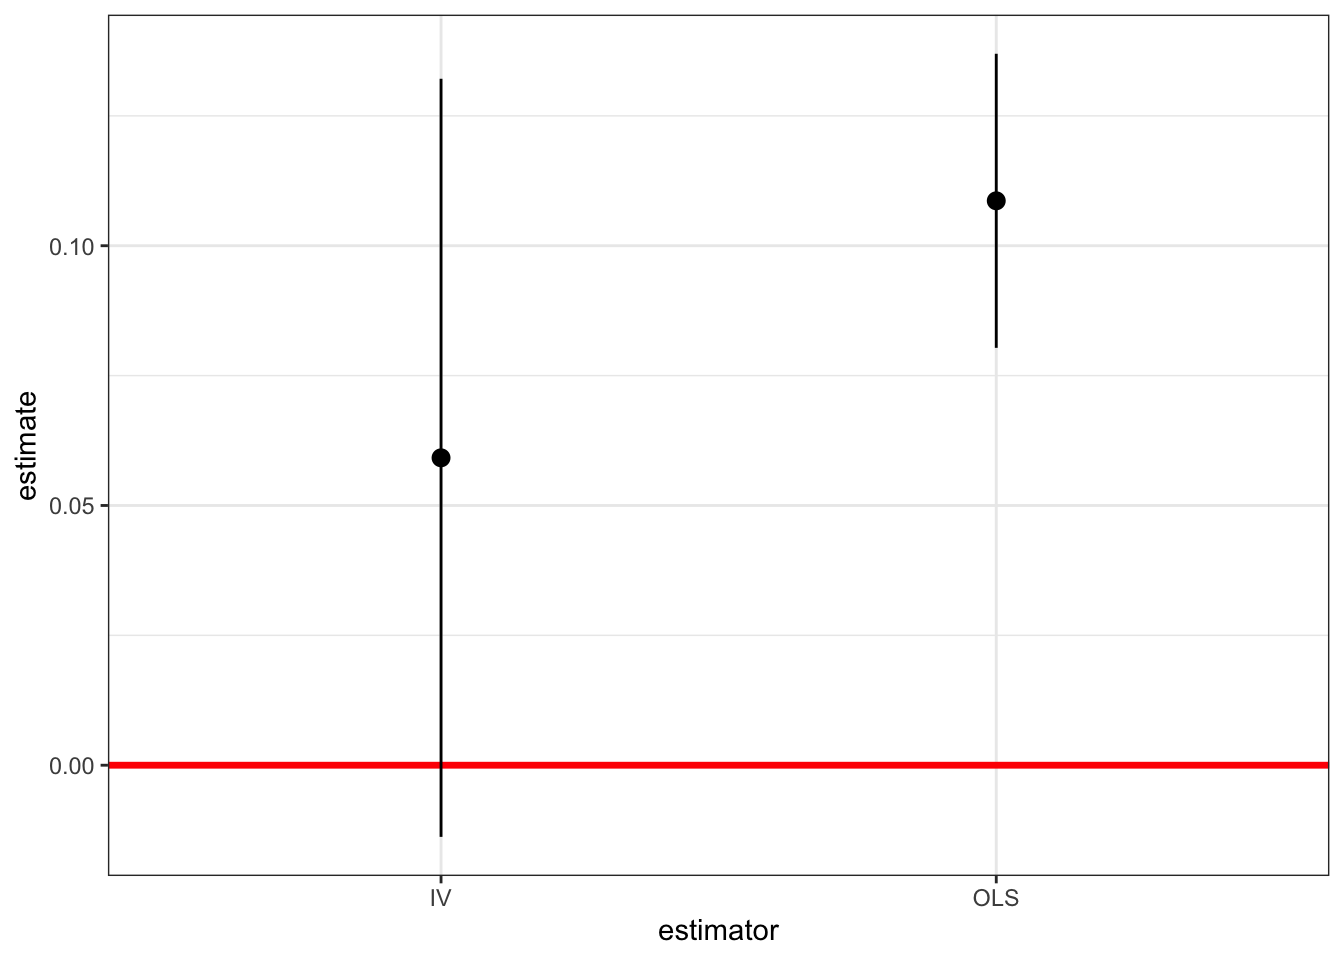 OLS vs IV Standard Errors: The dots represent the point estimates, and the solid vertical lines the standard error for both estimators.